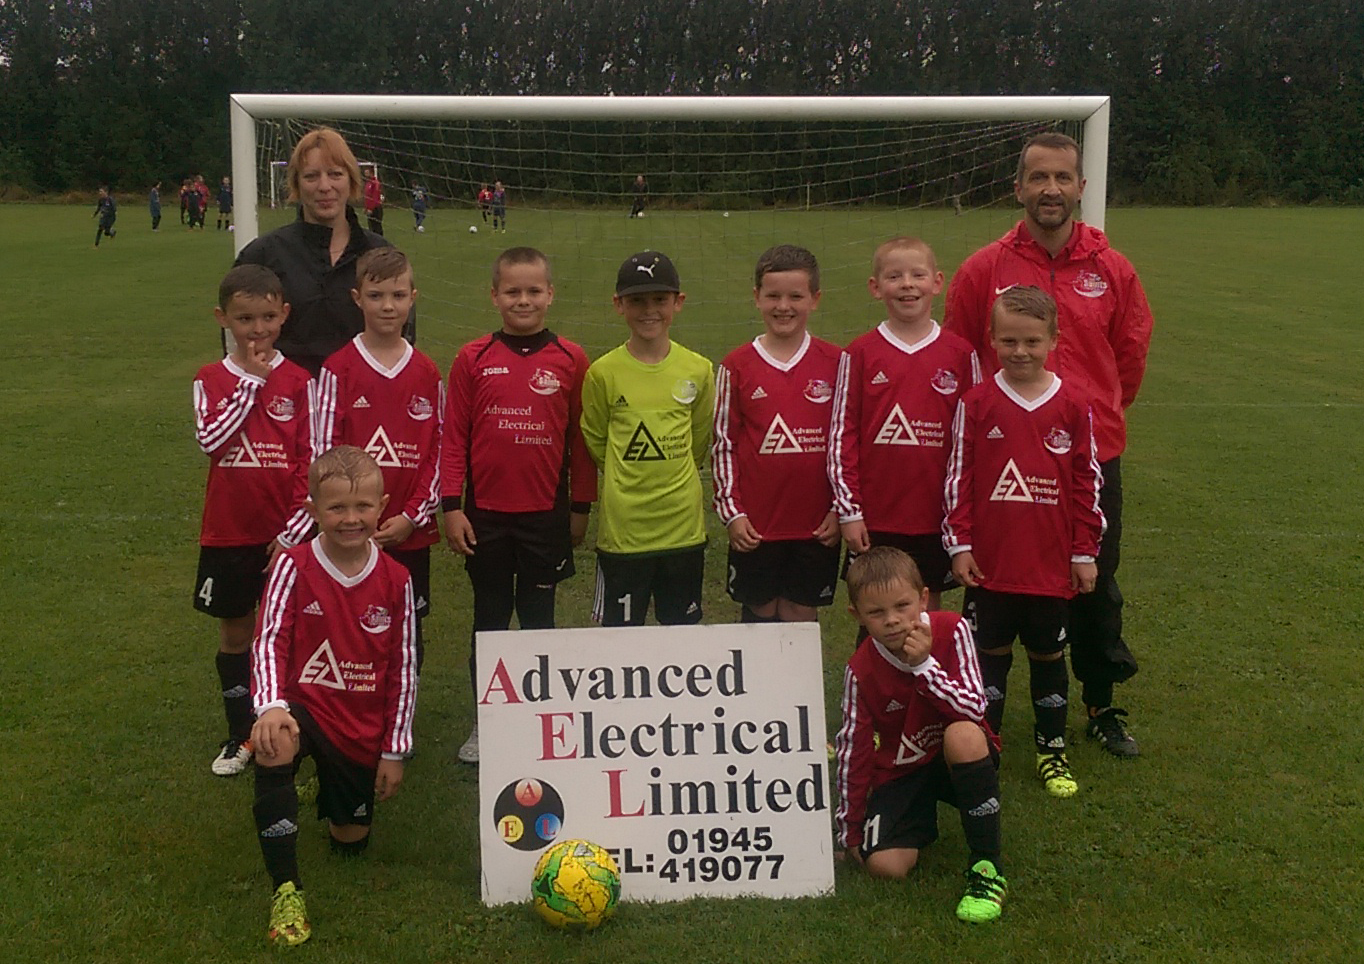 KITTED OUT: Tydd St Mary under-9s are pictured in their new AEL sponsored strip. Back (from left) – Corey Upson, Dawn Ashton from AEL, Lewis Melvin, Aaron Wright, Louis Cooper, Archie Court, Bryn Ashton, Gary Pratt (manager) Jaydon Lee; Front – Kai Mackie and Bailey King.